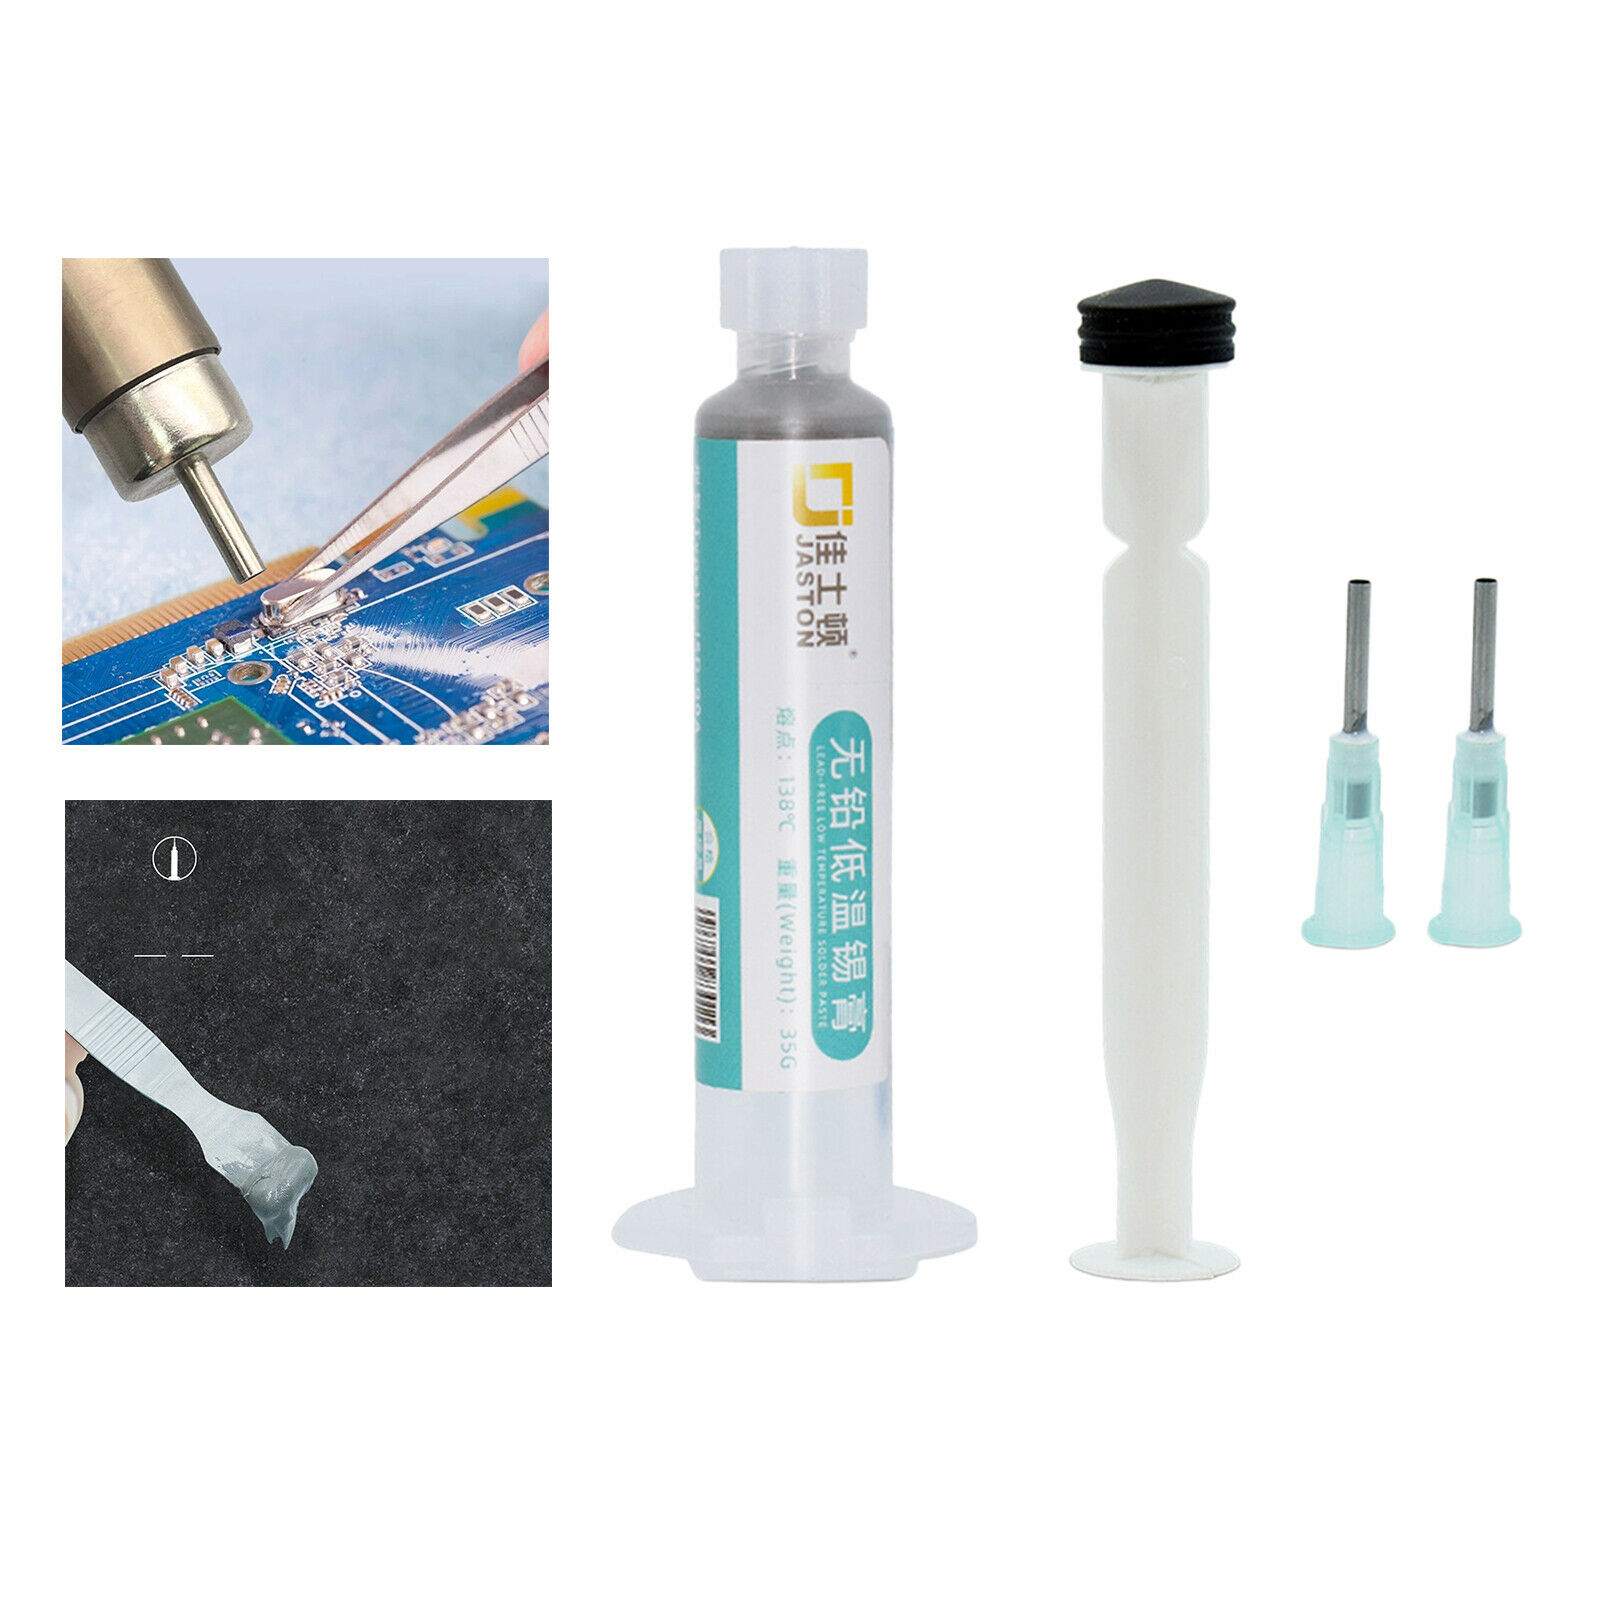 Solid Solder Paste Dispenser No-clean Lead-free Low Temperature Melts 35g, Helps